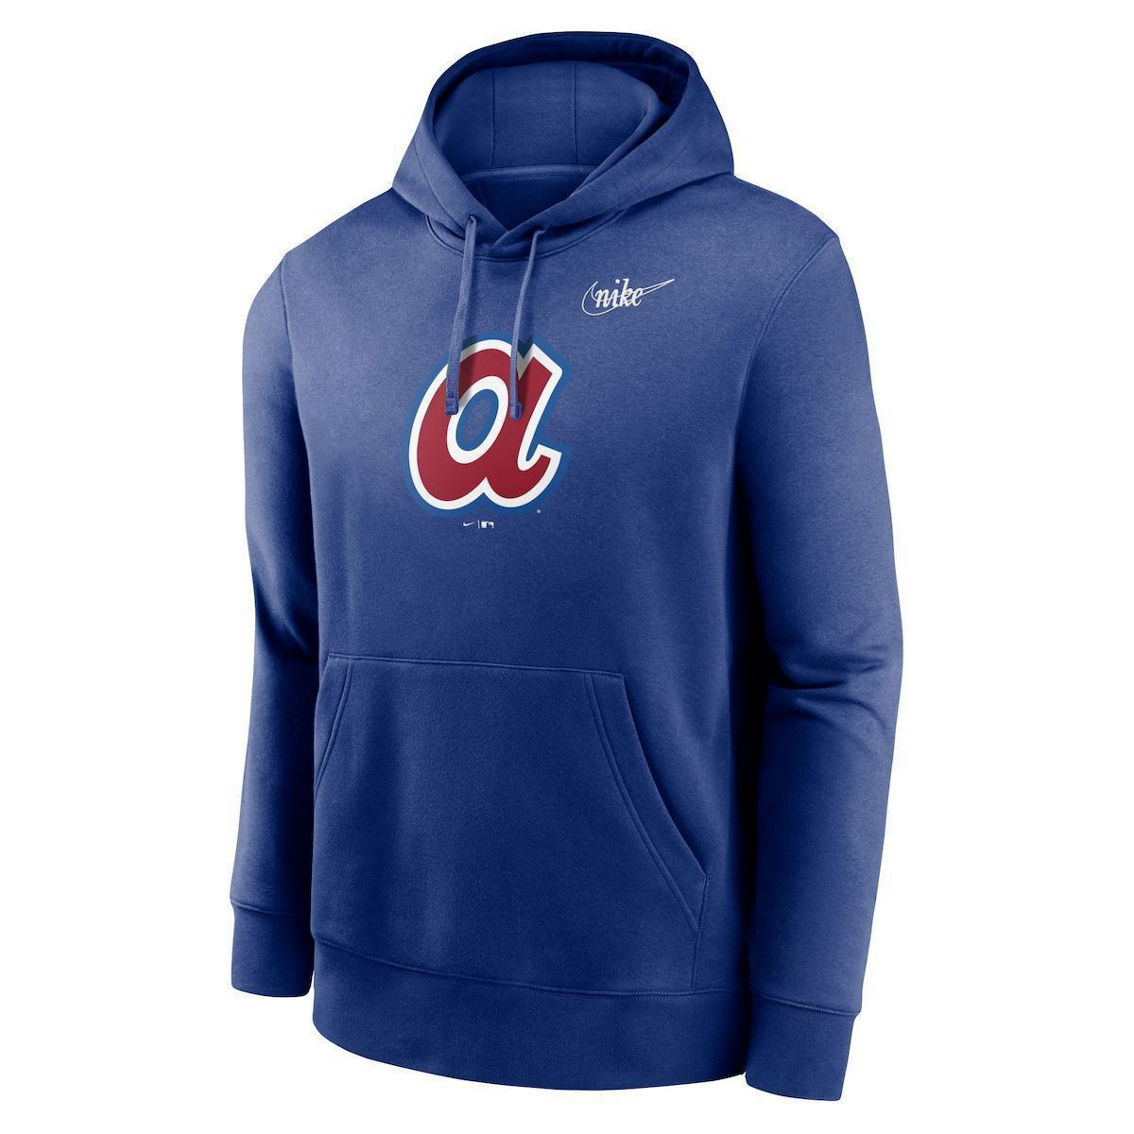 Men's Nike Royal Atlanta Braves Cooperstown Collection Logo Club Pullover Hoodie - Image 3 of 4